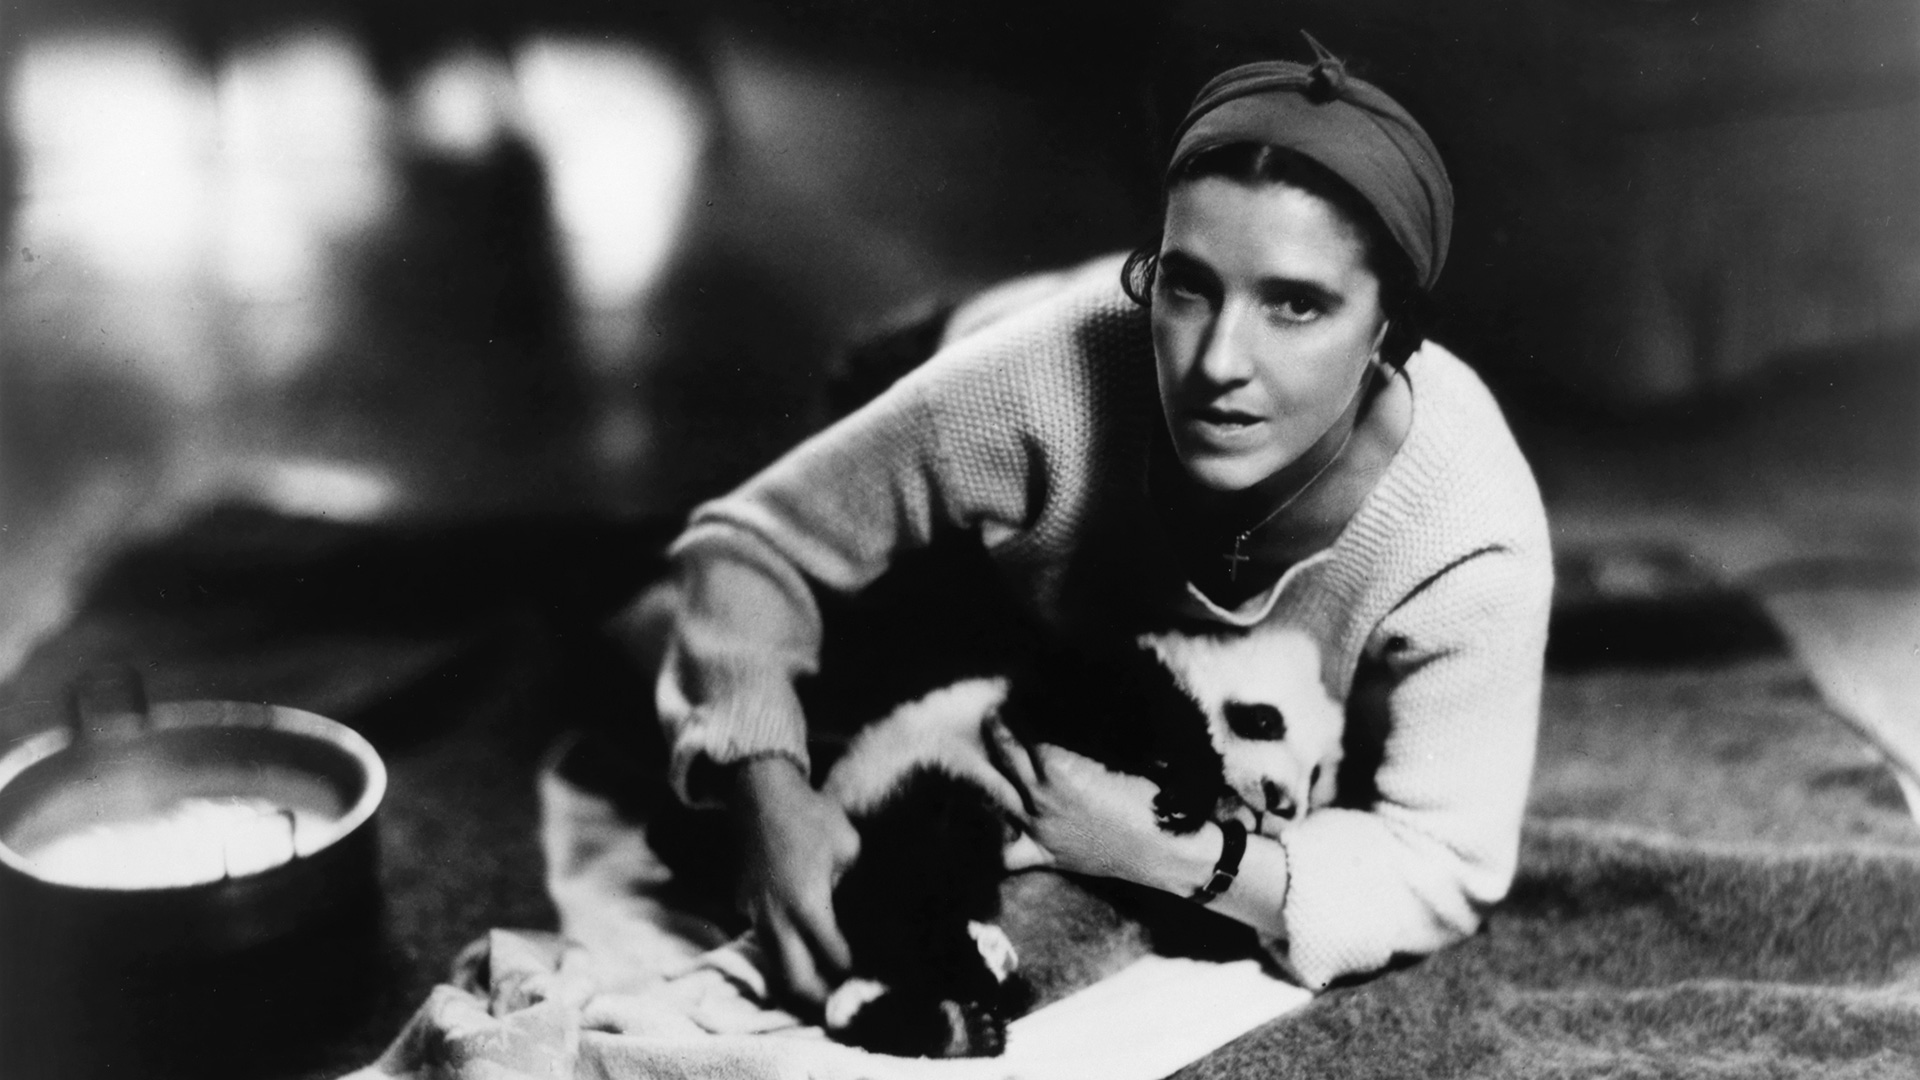 November 9, 1936: Ruth Harkness Became the First Person to Capture a Giant Panda and Bring It Back to the United States Alive